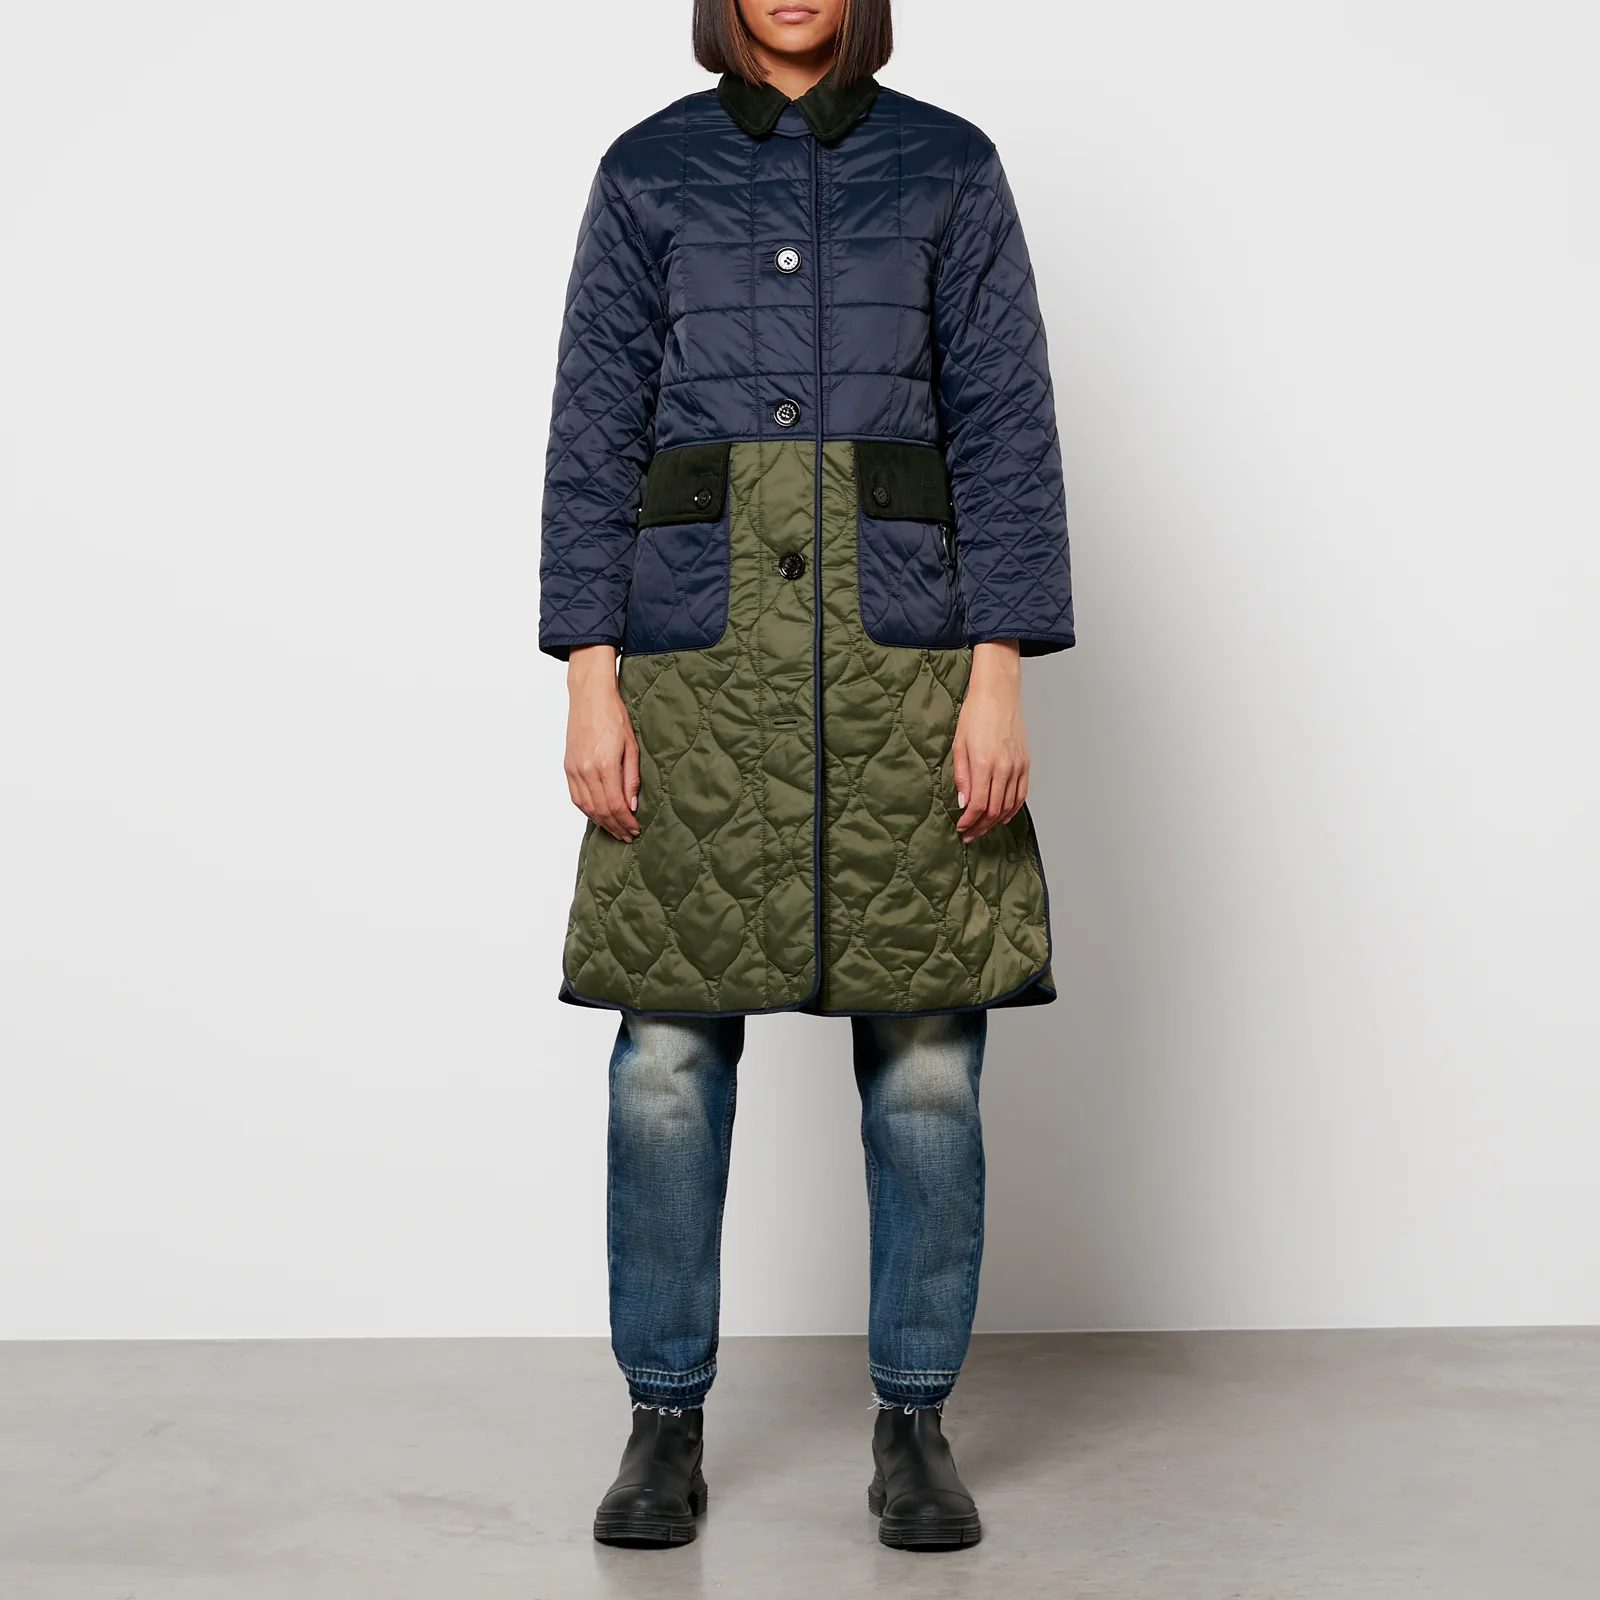 Barbour X ALEXACHUNG Women's Hilda Quiltted Jacket - Navy Image 1